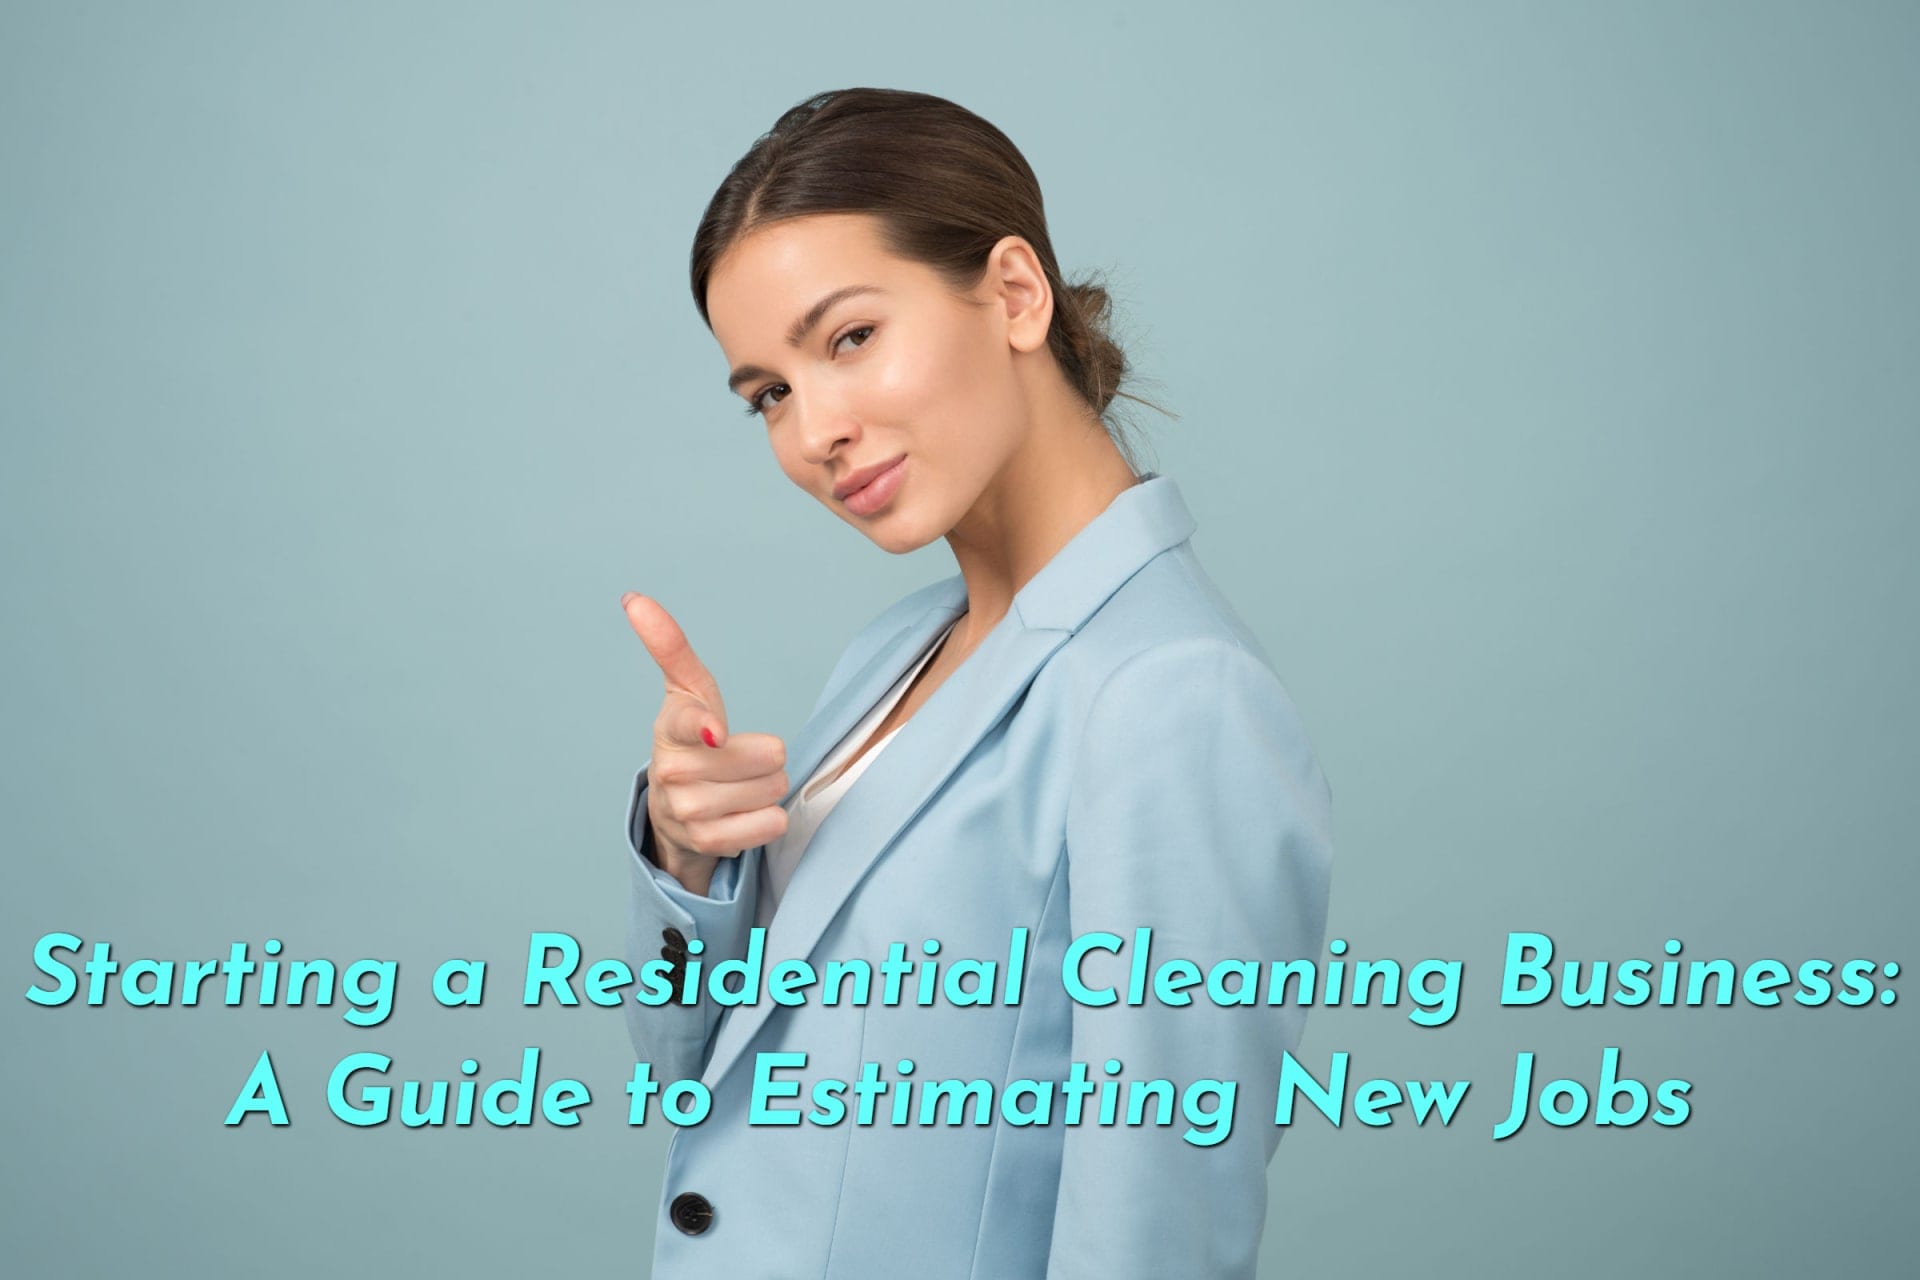 Starting a Residential Cleaning Business: A Guide to Estimating New Jobs